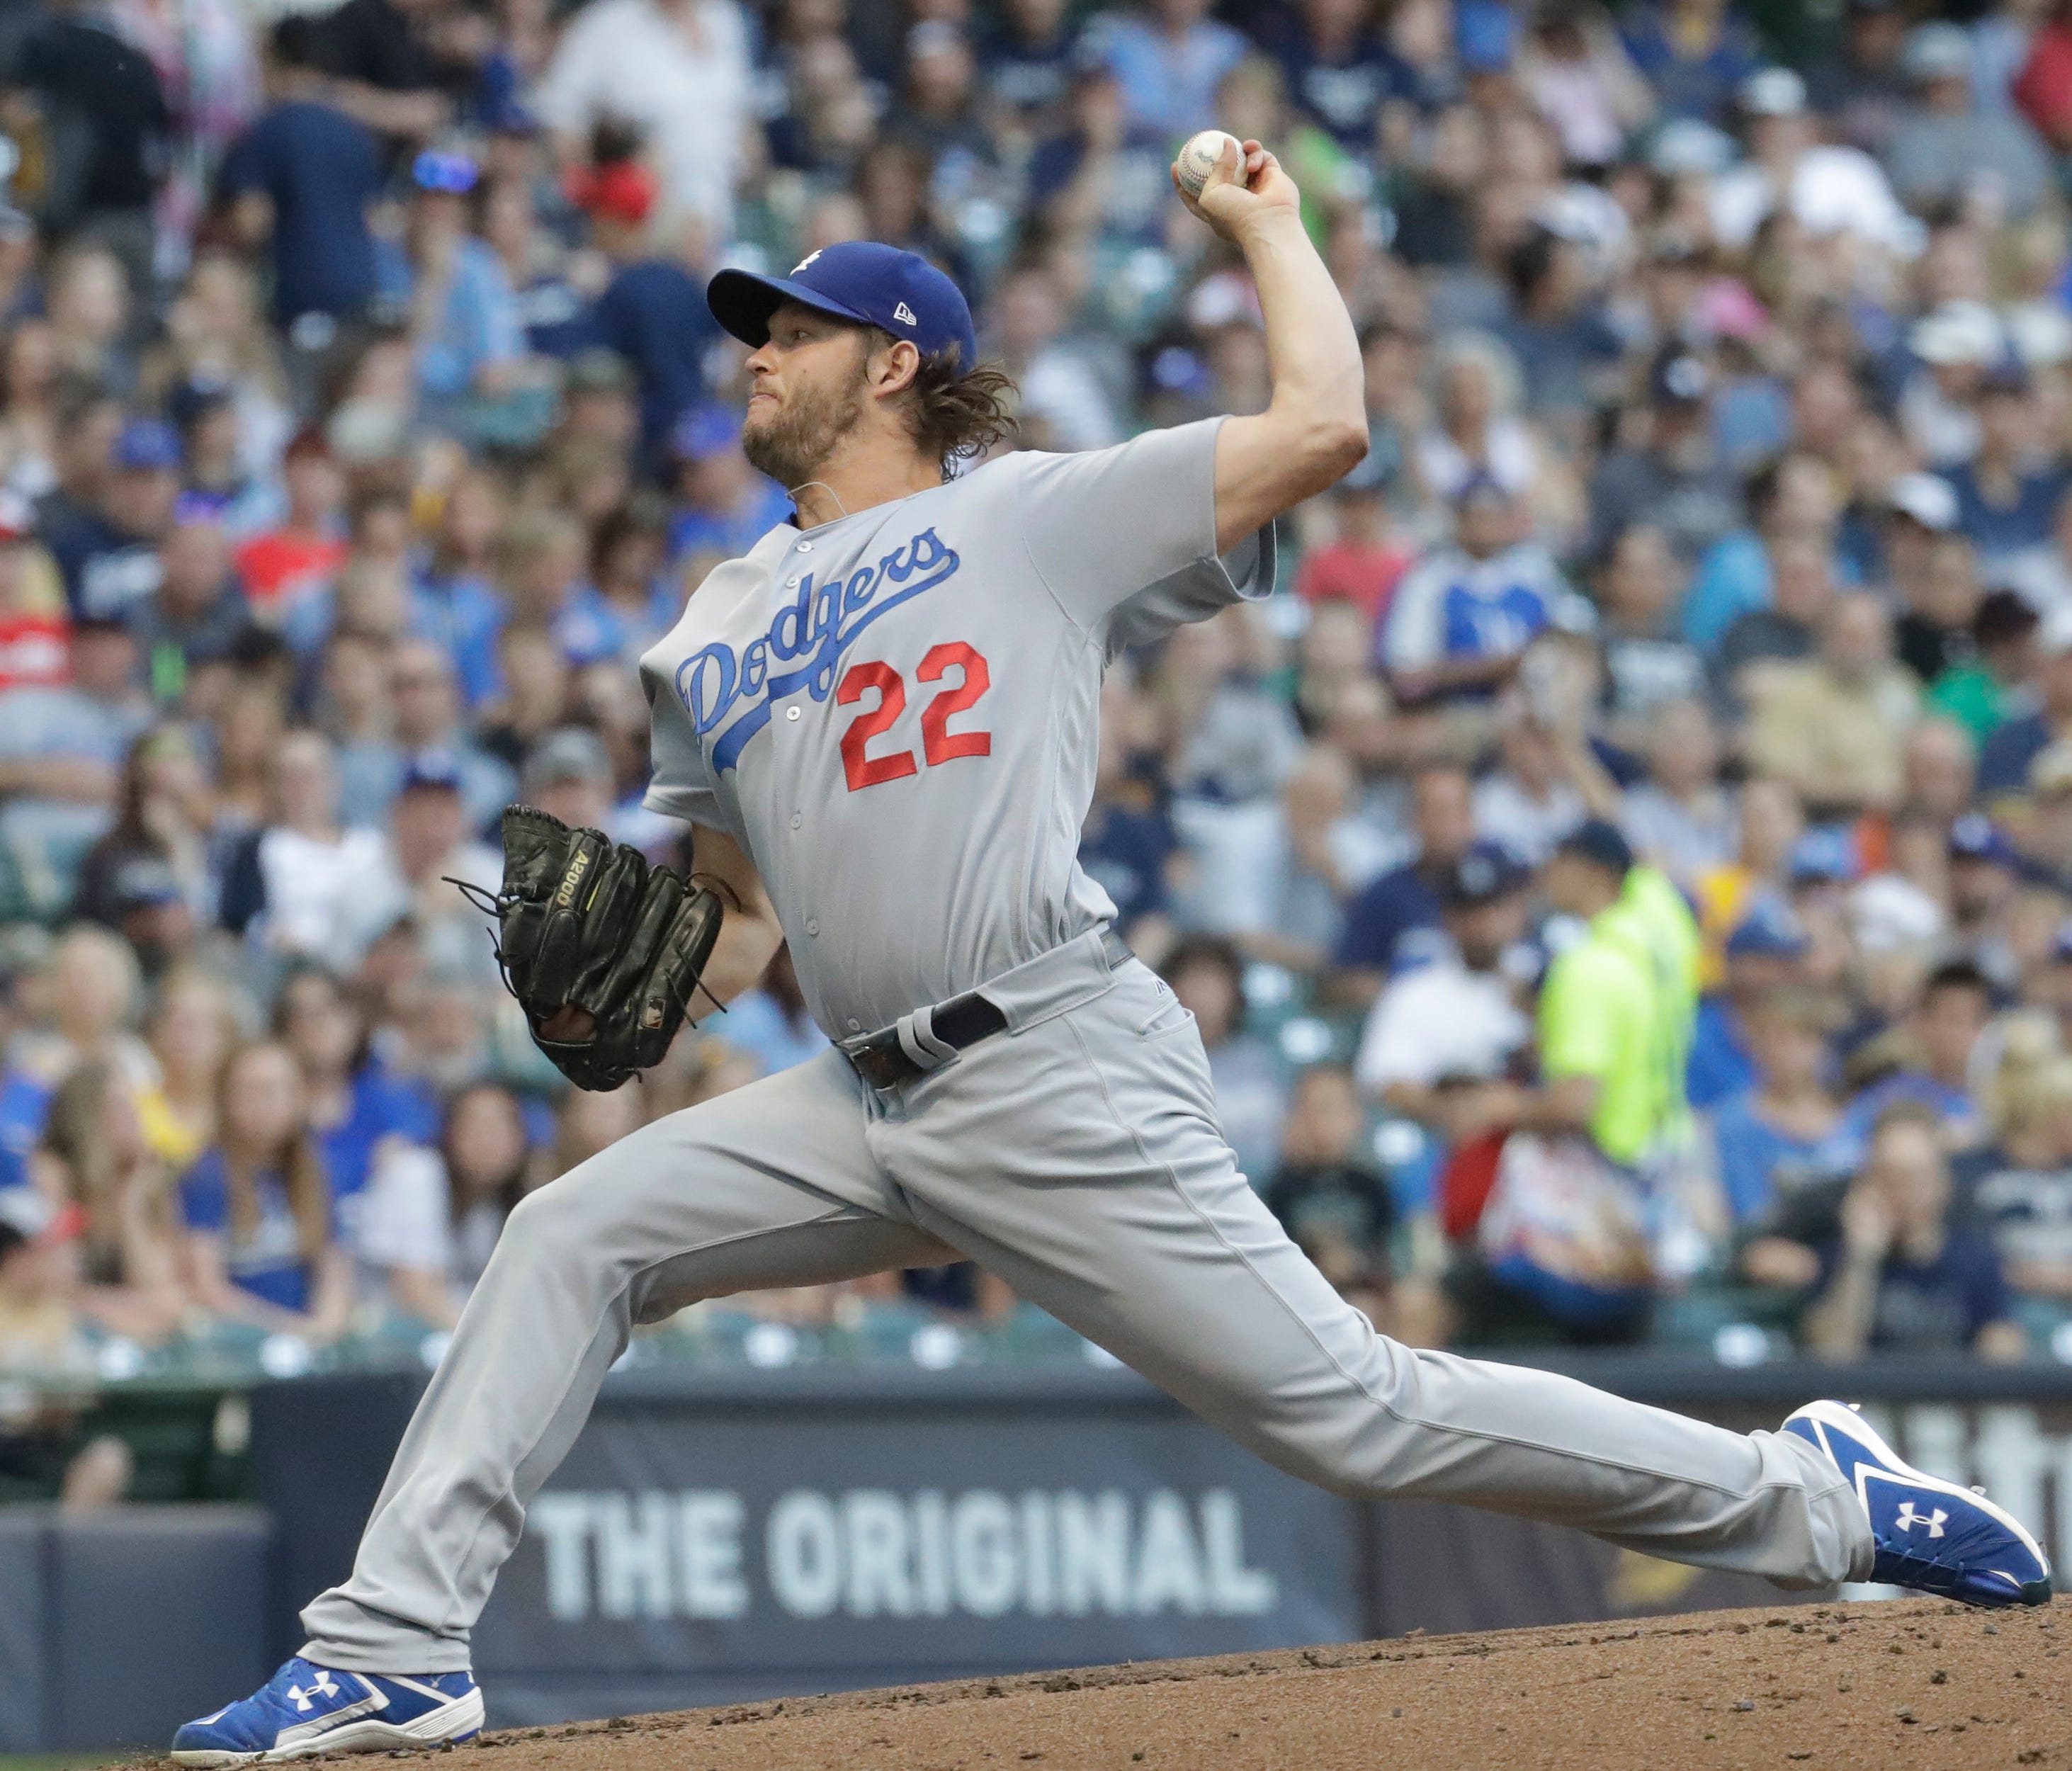 Clayton Kershaw went into Friday's start with a 7-2 record and 2.37 ERA.